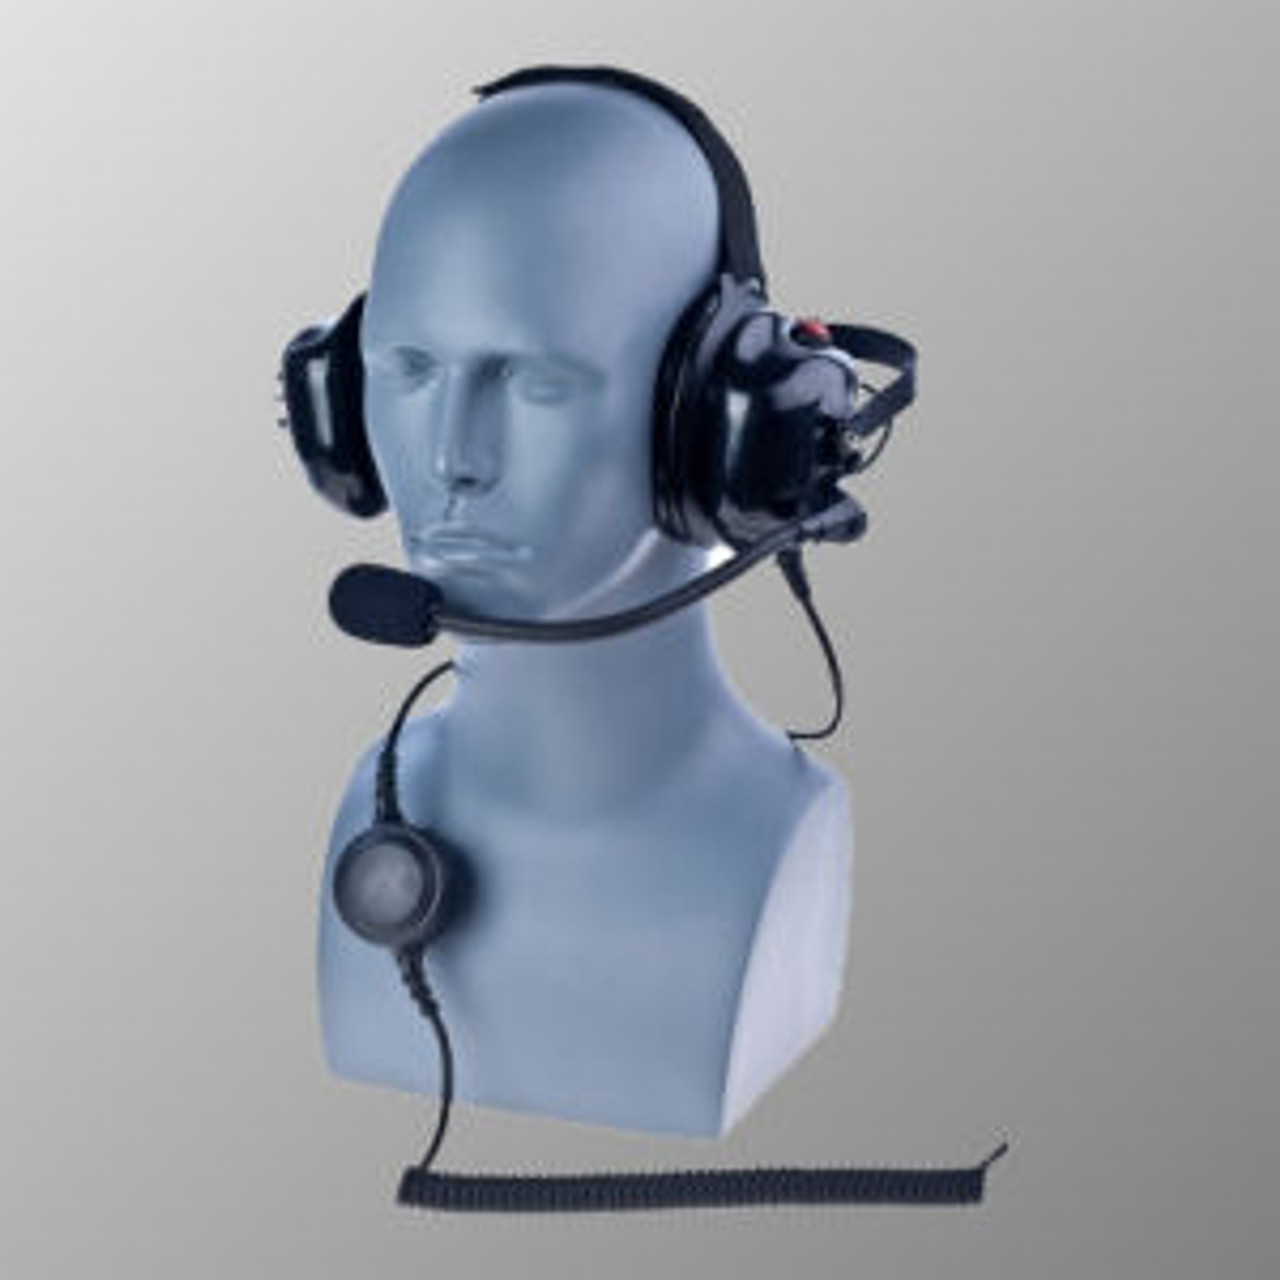 Motorola APX1000 Noise Canceling Behind The Head Double Muff Headset